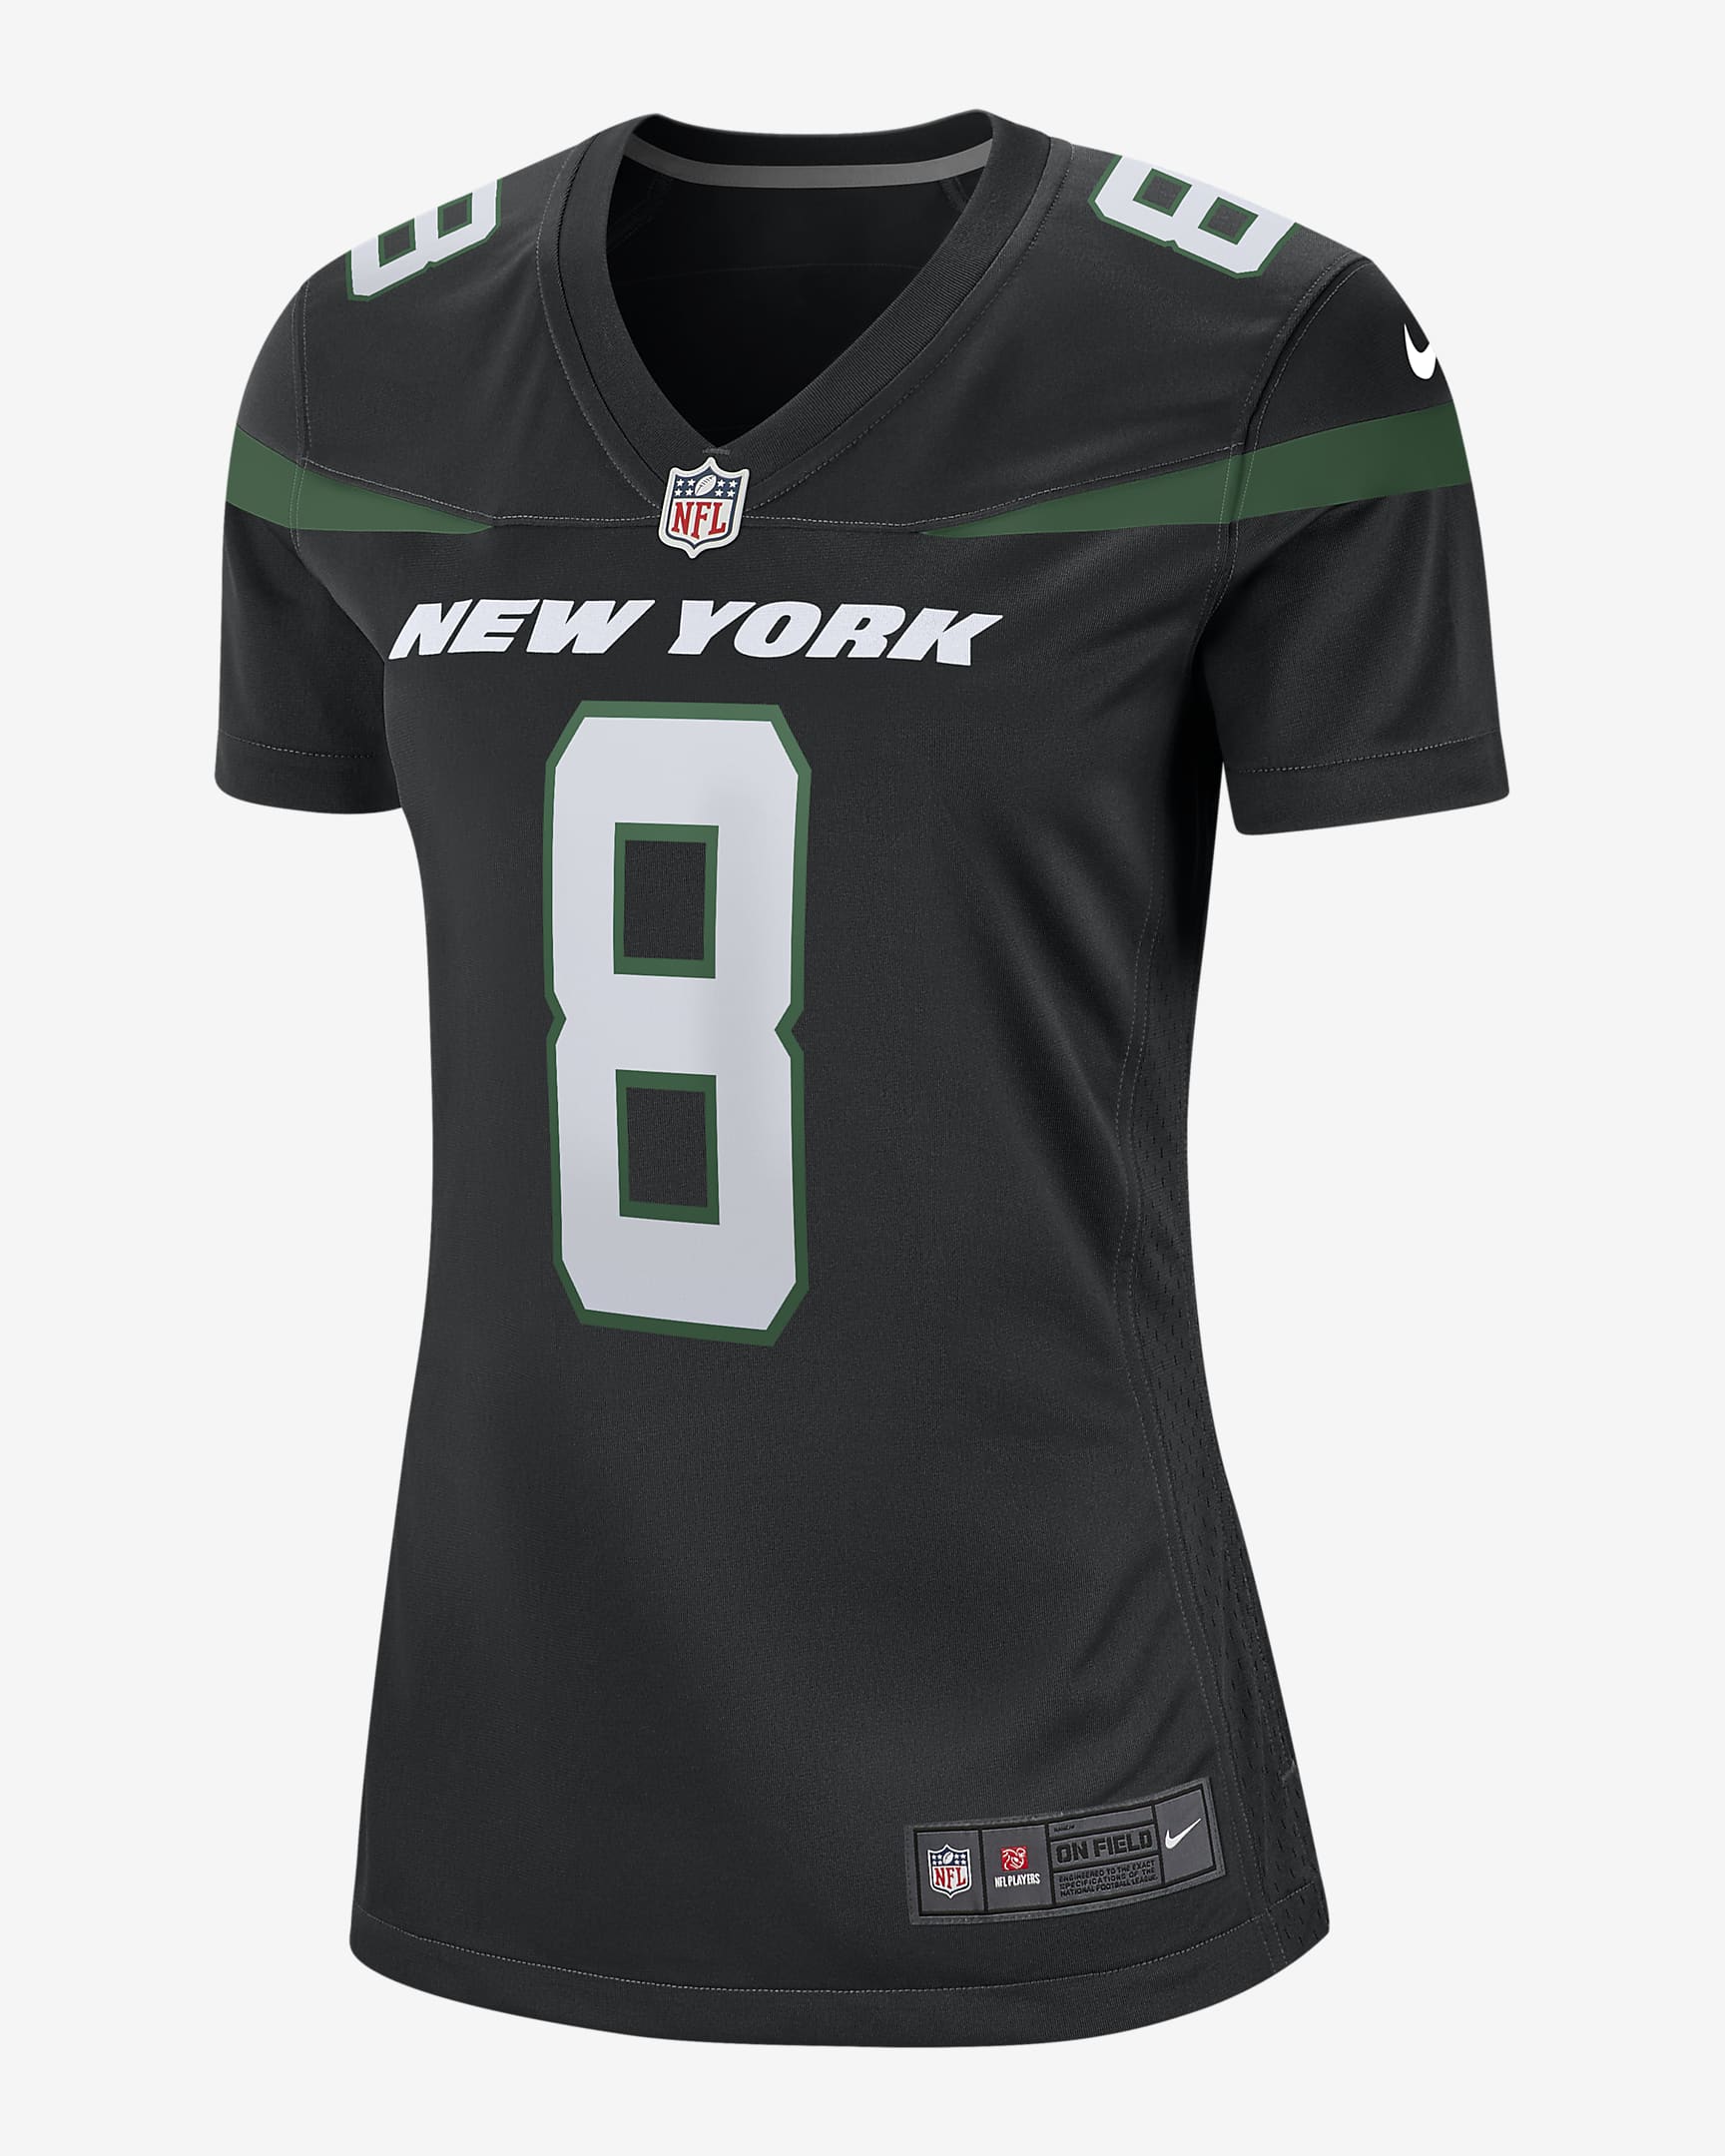 Aaron Rodgers New York Jets Women's Nike NFL Game Football Jersey. Nike.com